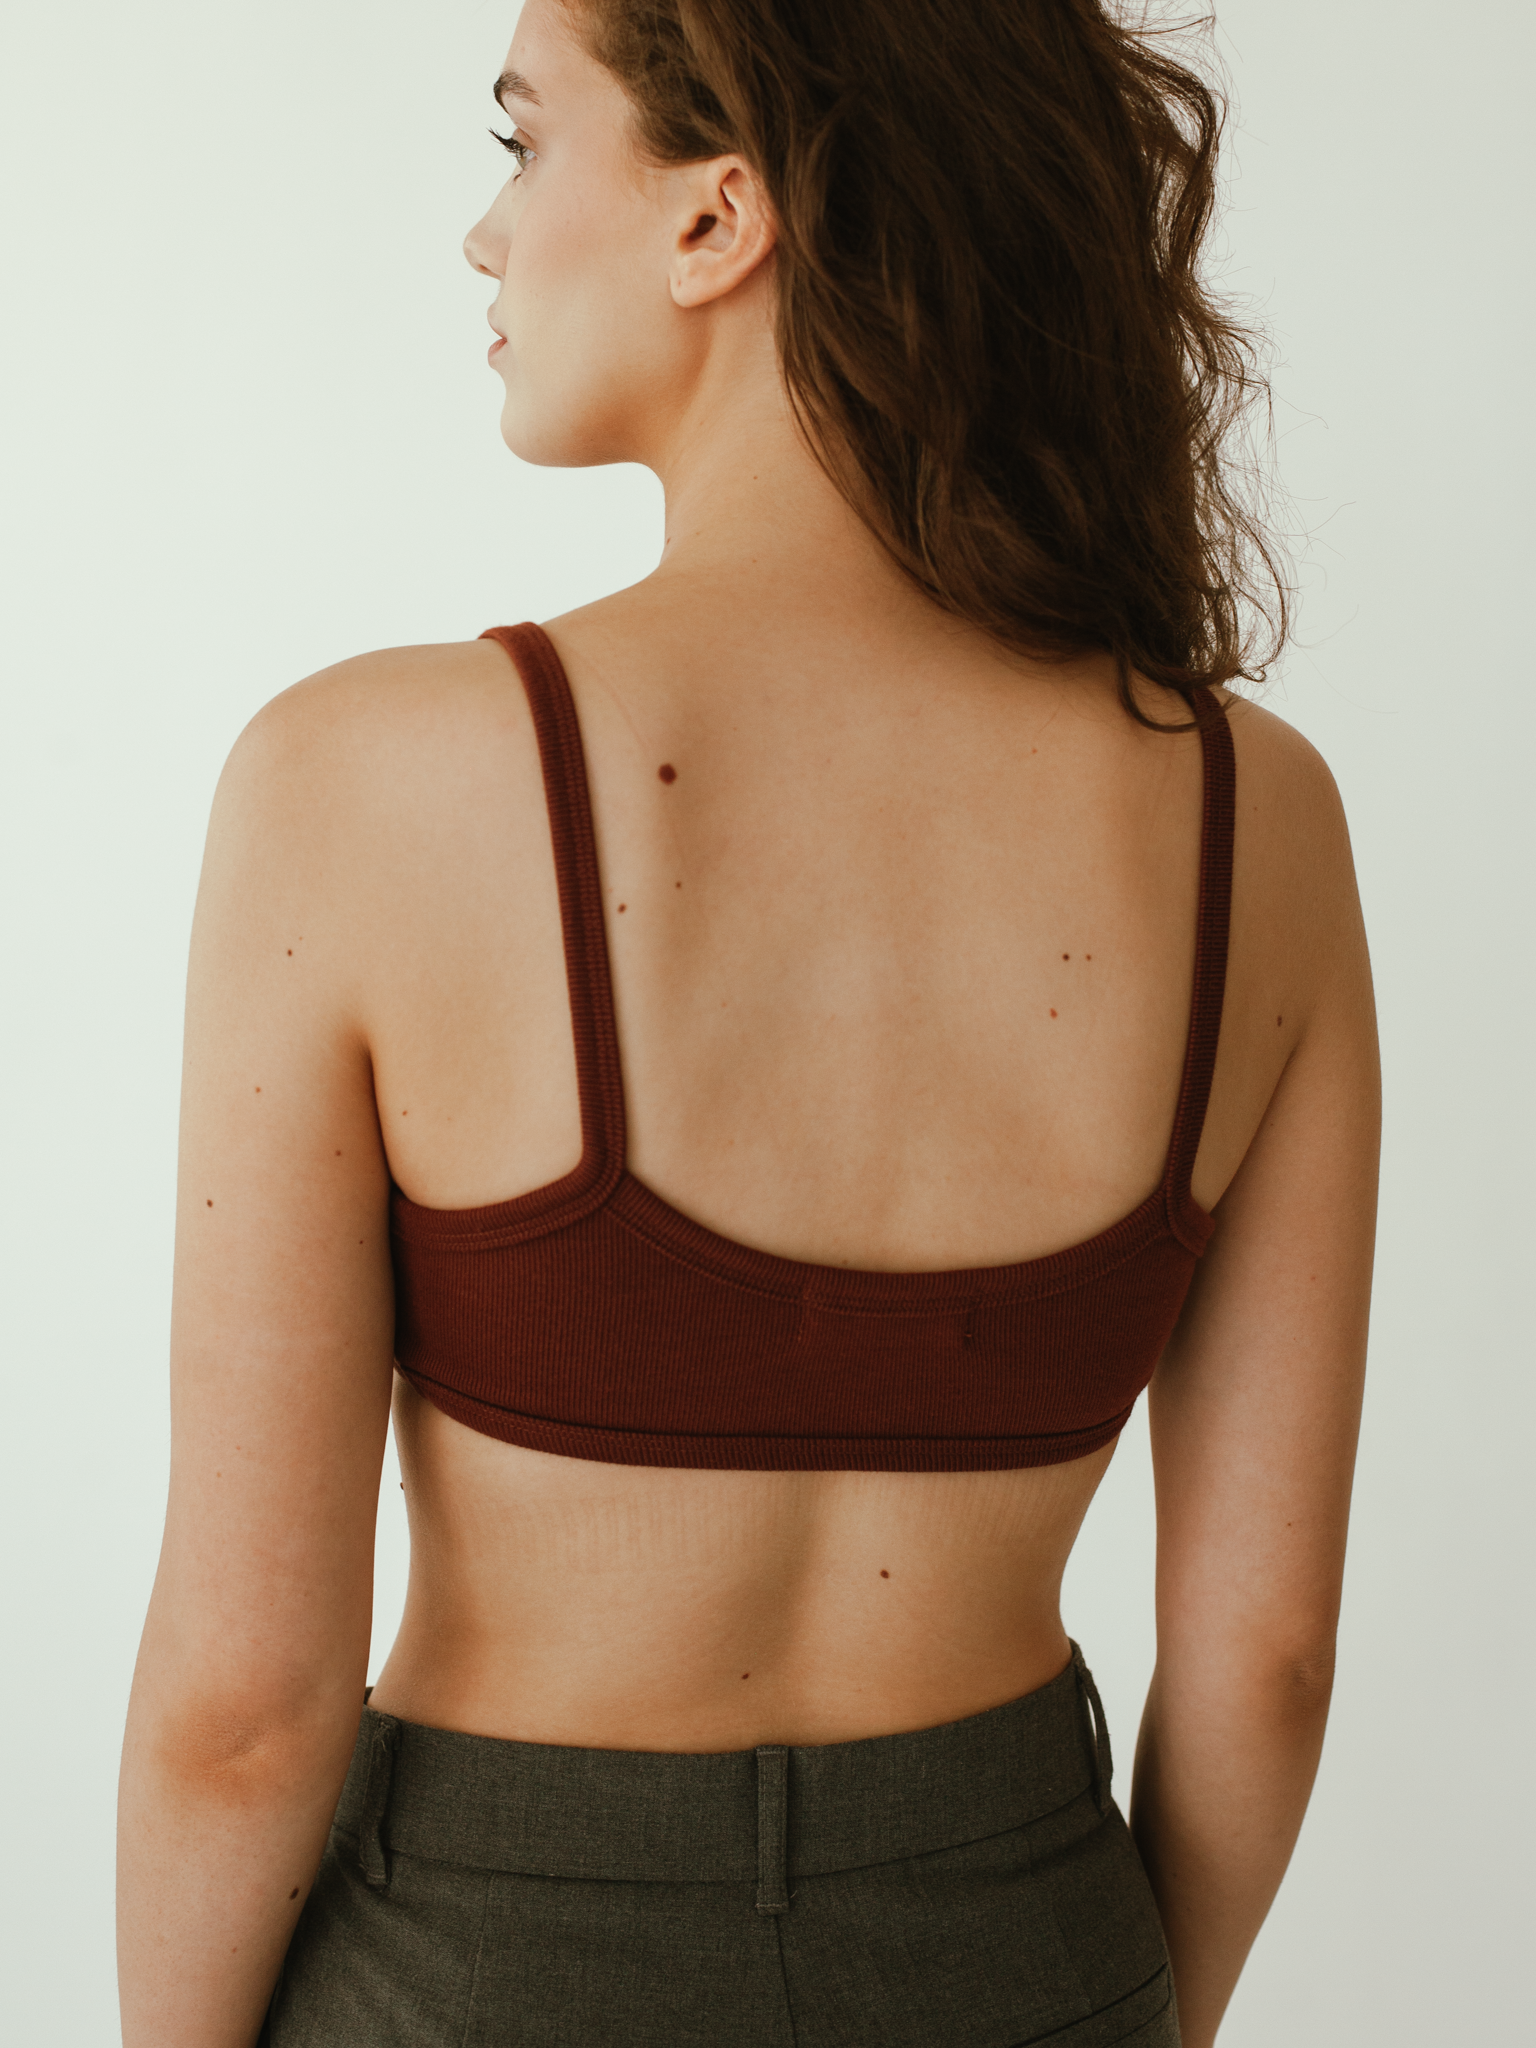 Knit Bralette Top, Inspired Wings Fashion